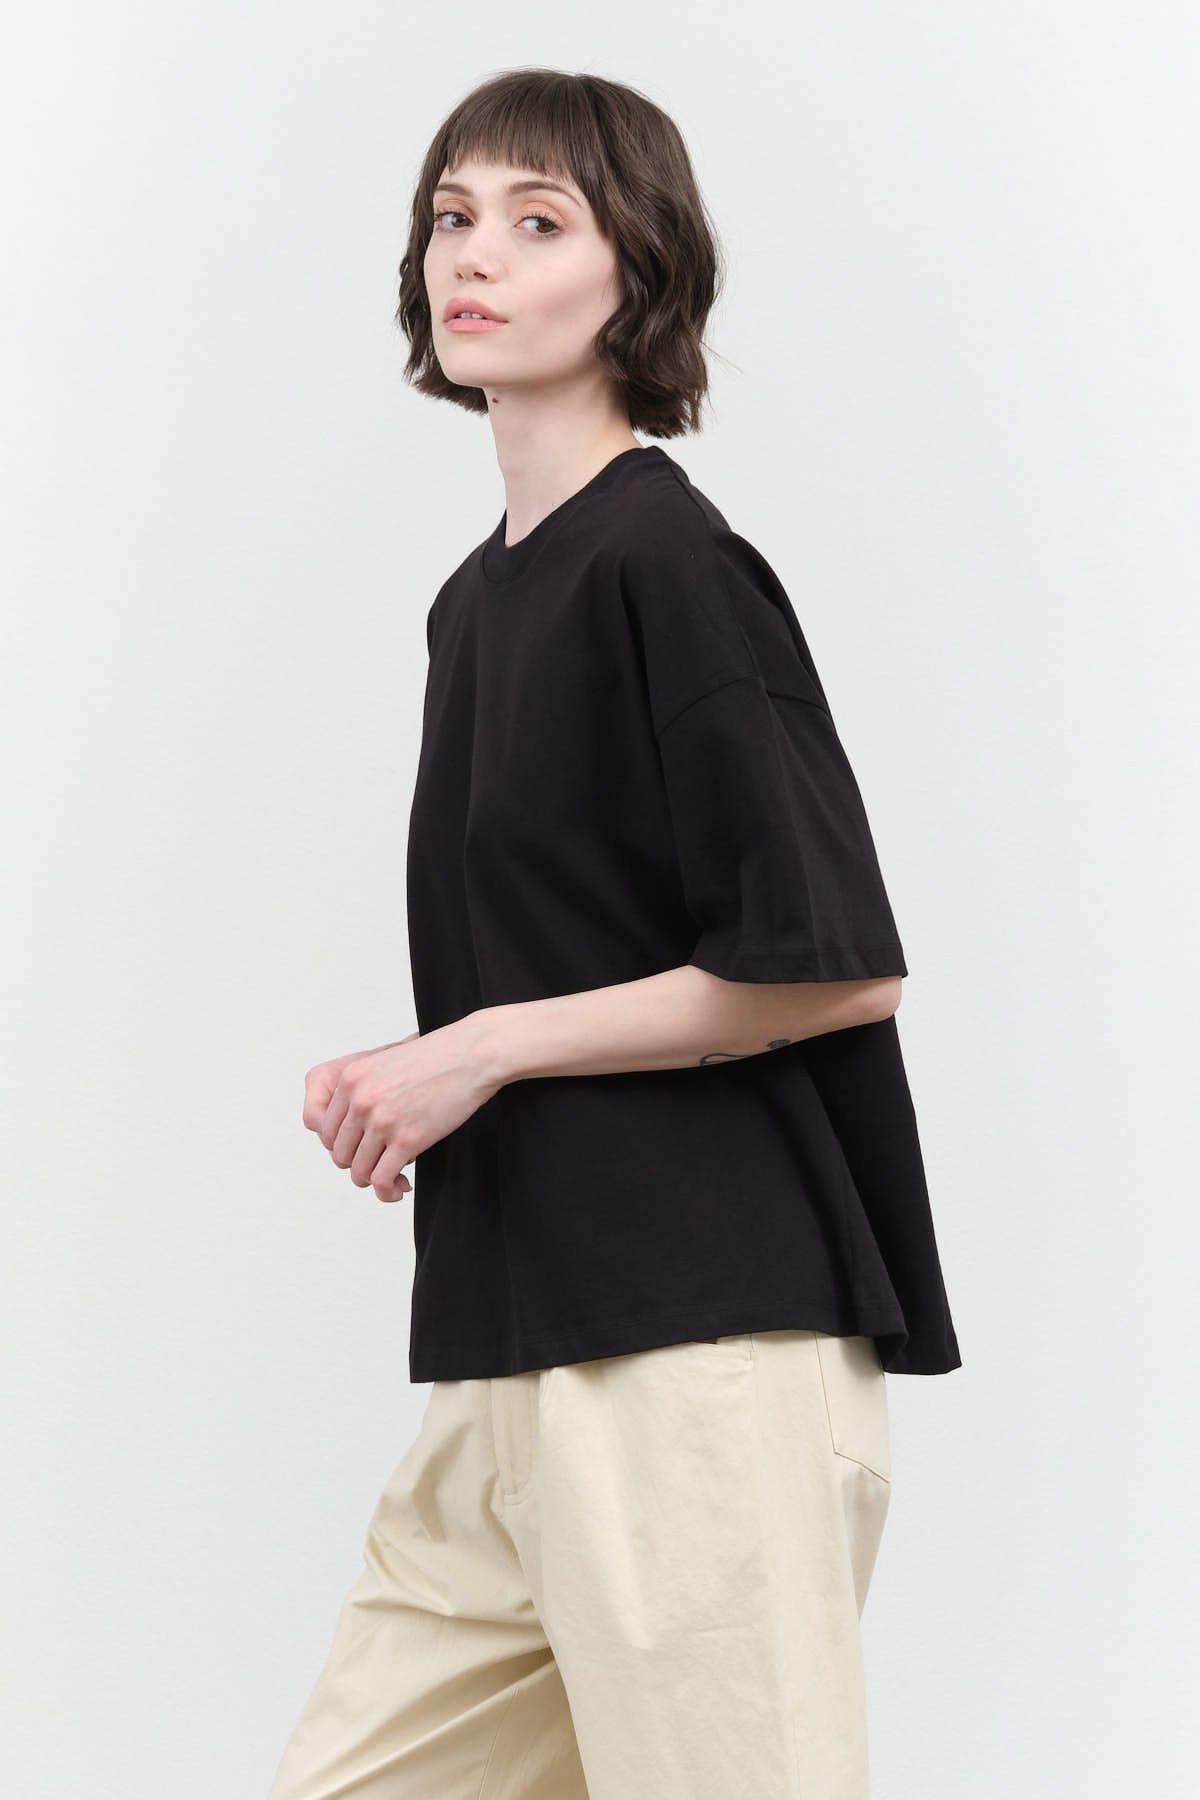 Styled view of Oversized Boxy Tee in Black